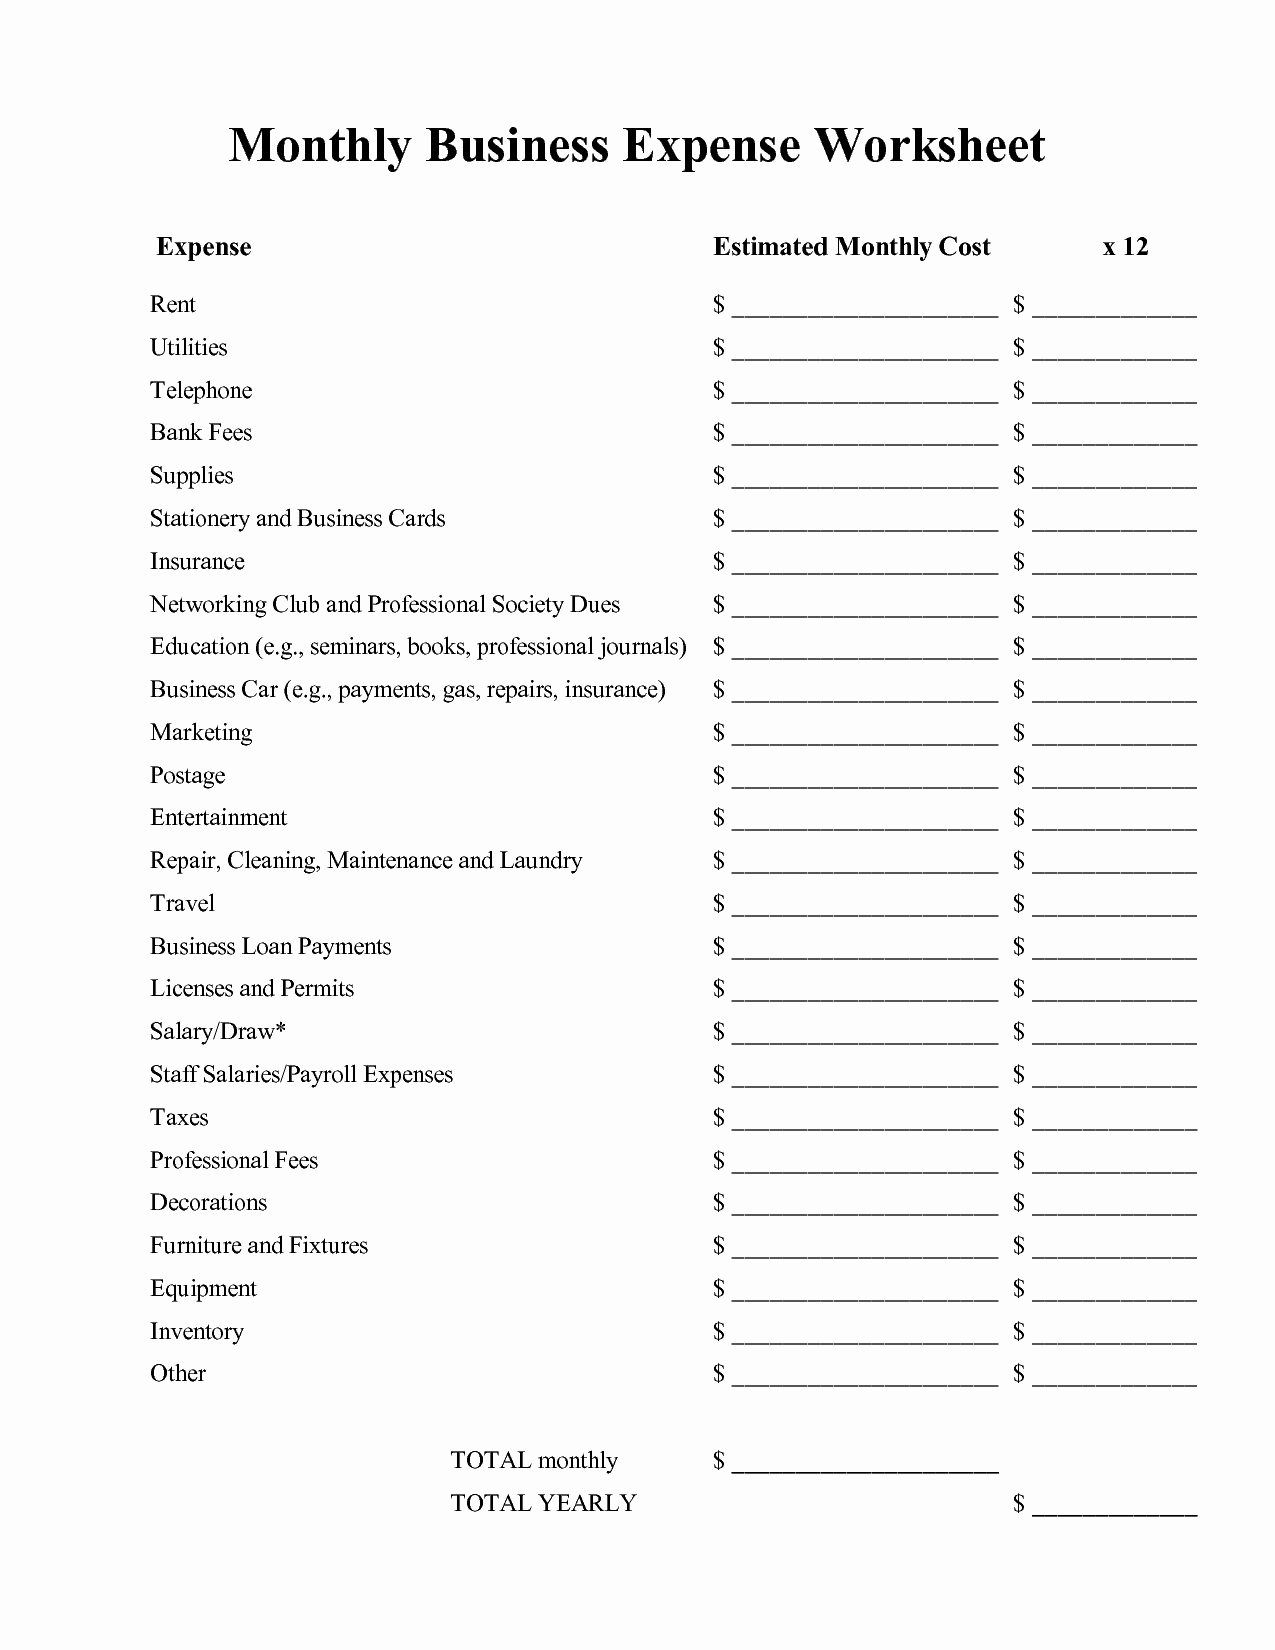 Monthly Expenses Spreadsheet Template Best Of Monthly Business Expenses Worksheet Monthly Business